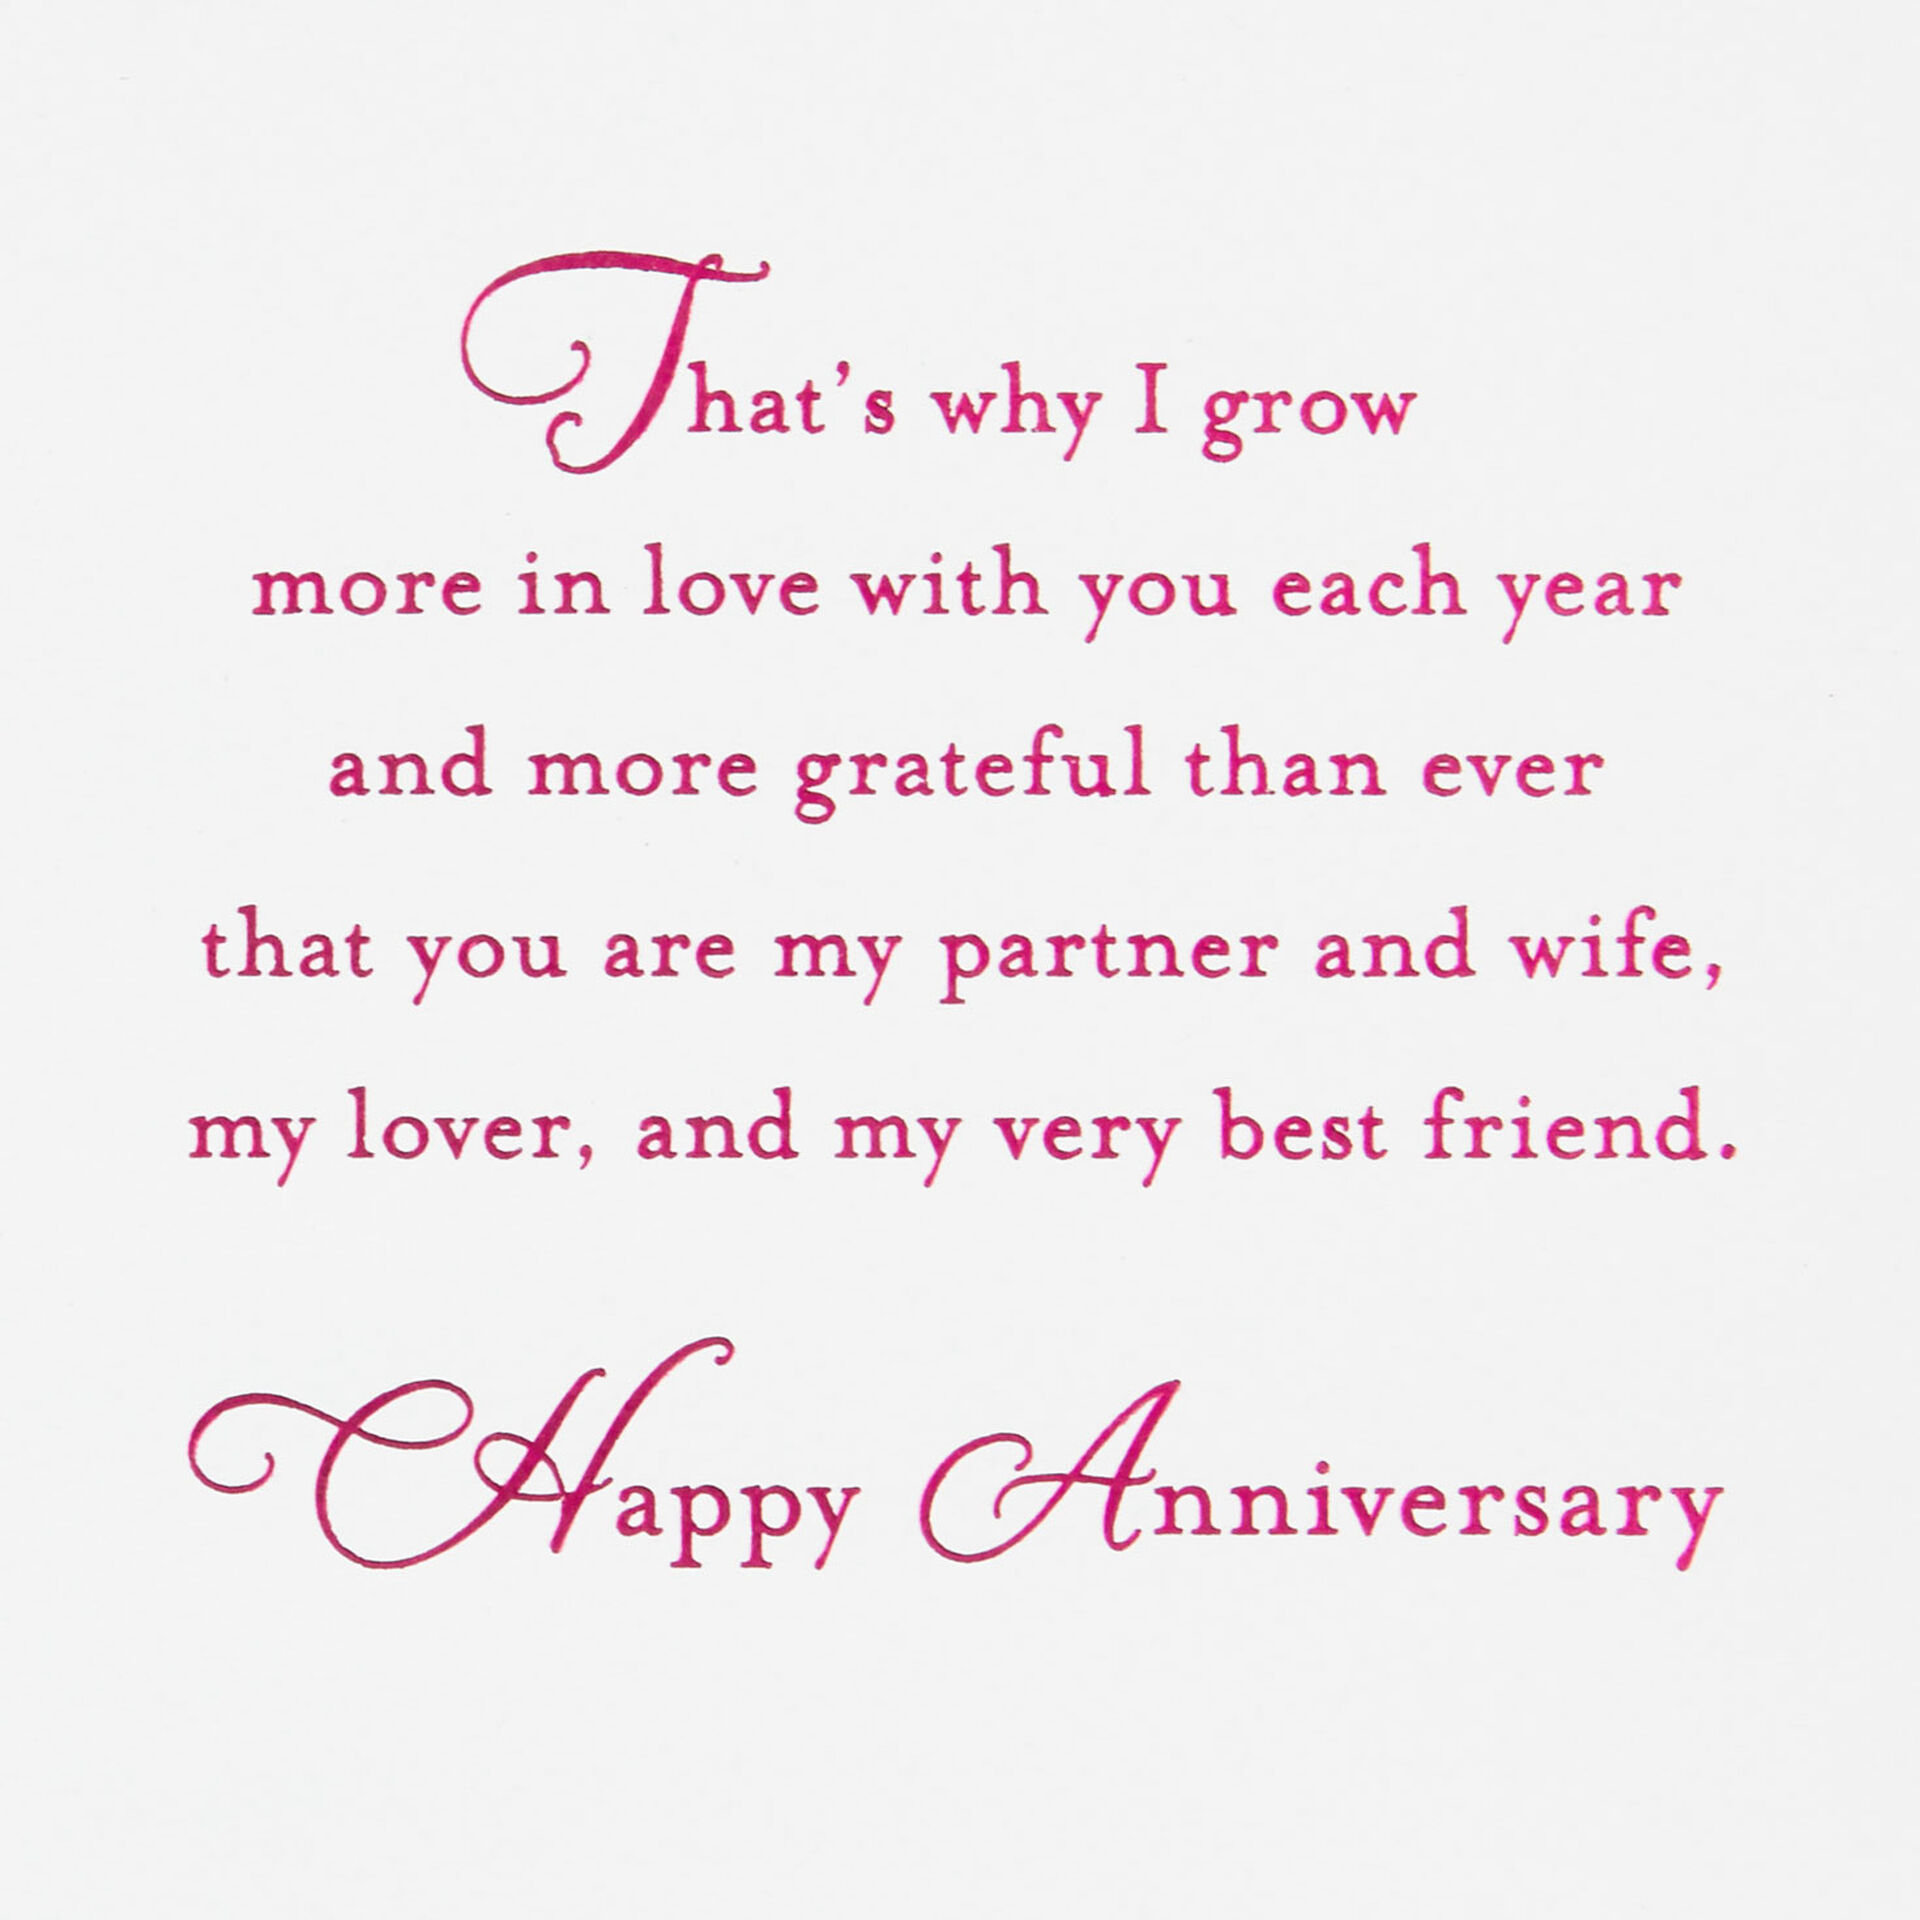 Couple-Holding-Hands-Anniversary-Card-for-Wife_599AVY3068_03